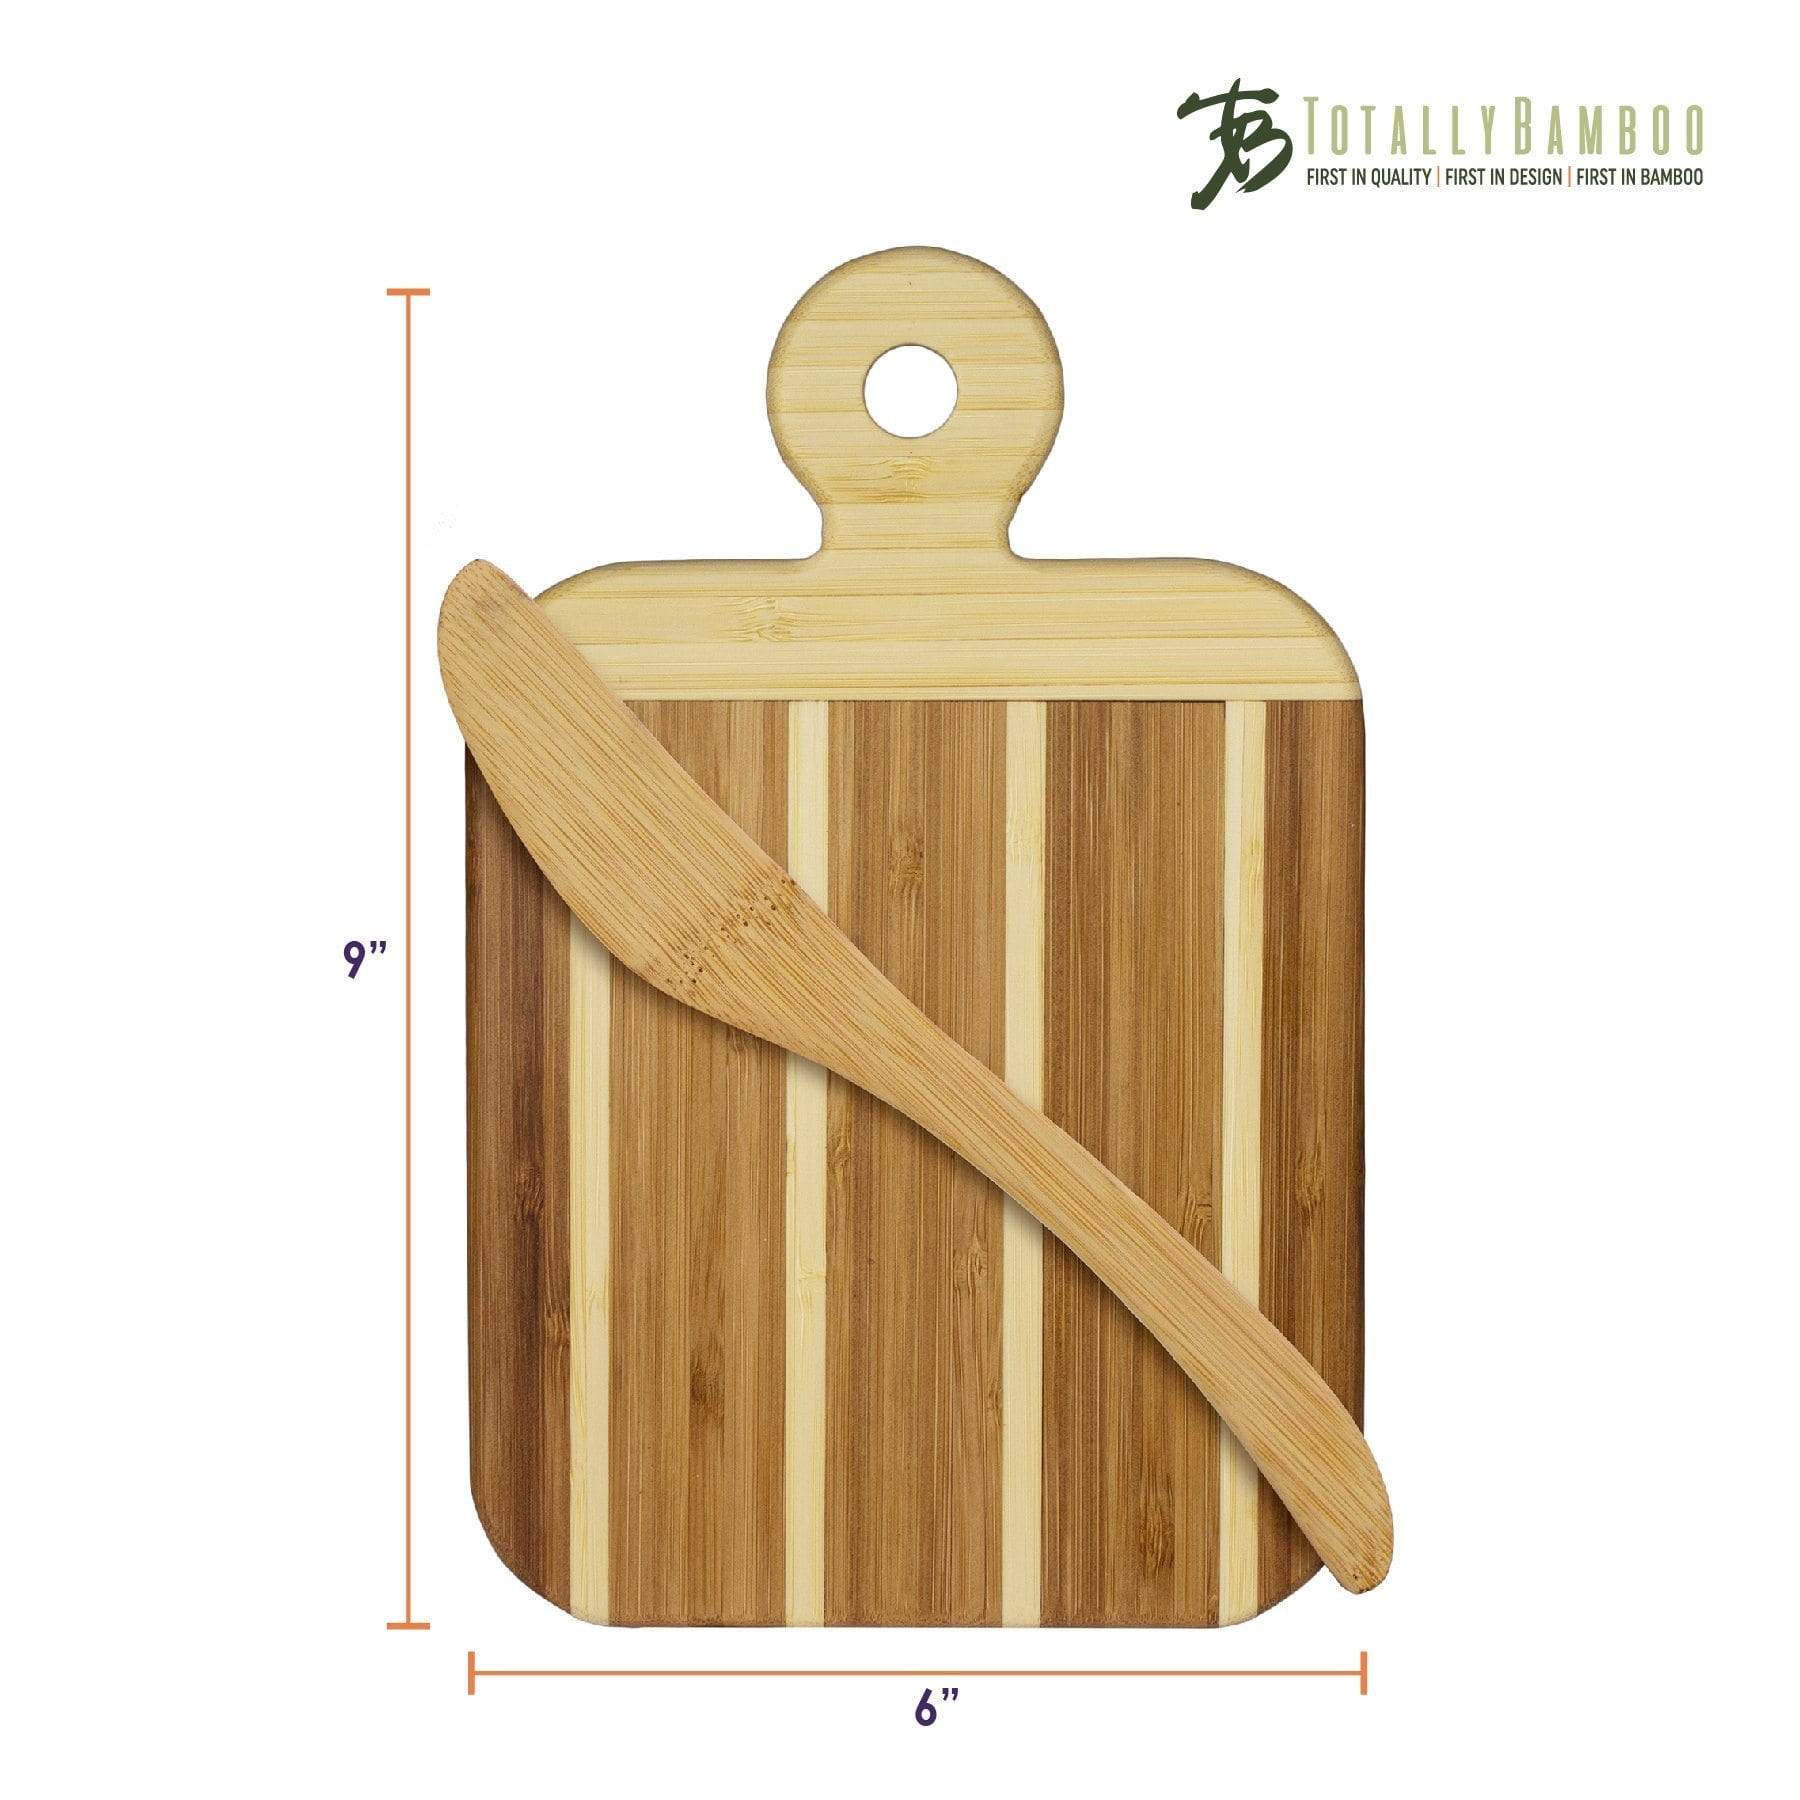 Totally Bamboo Striped Paddle Serving and Cutting Board and Spreader Knife Gift Set